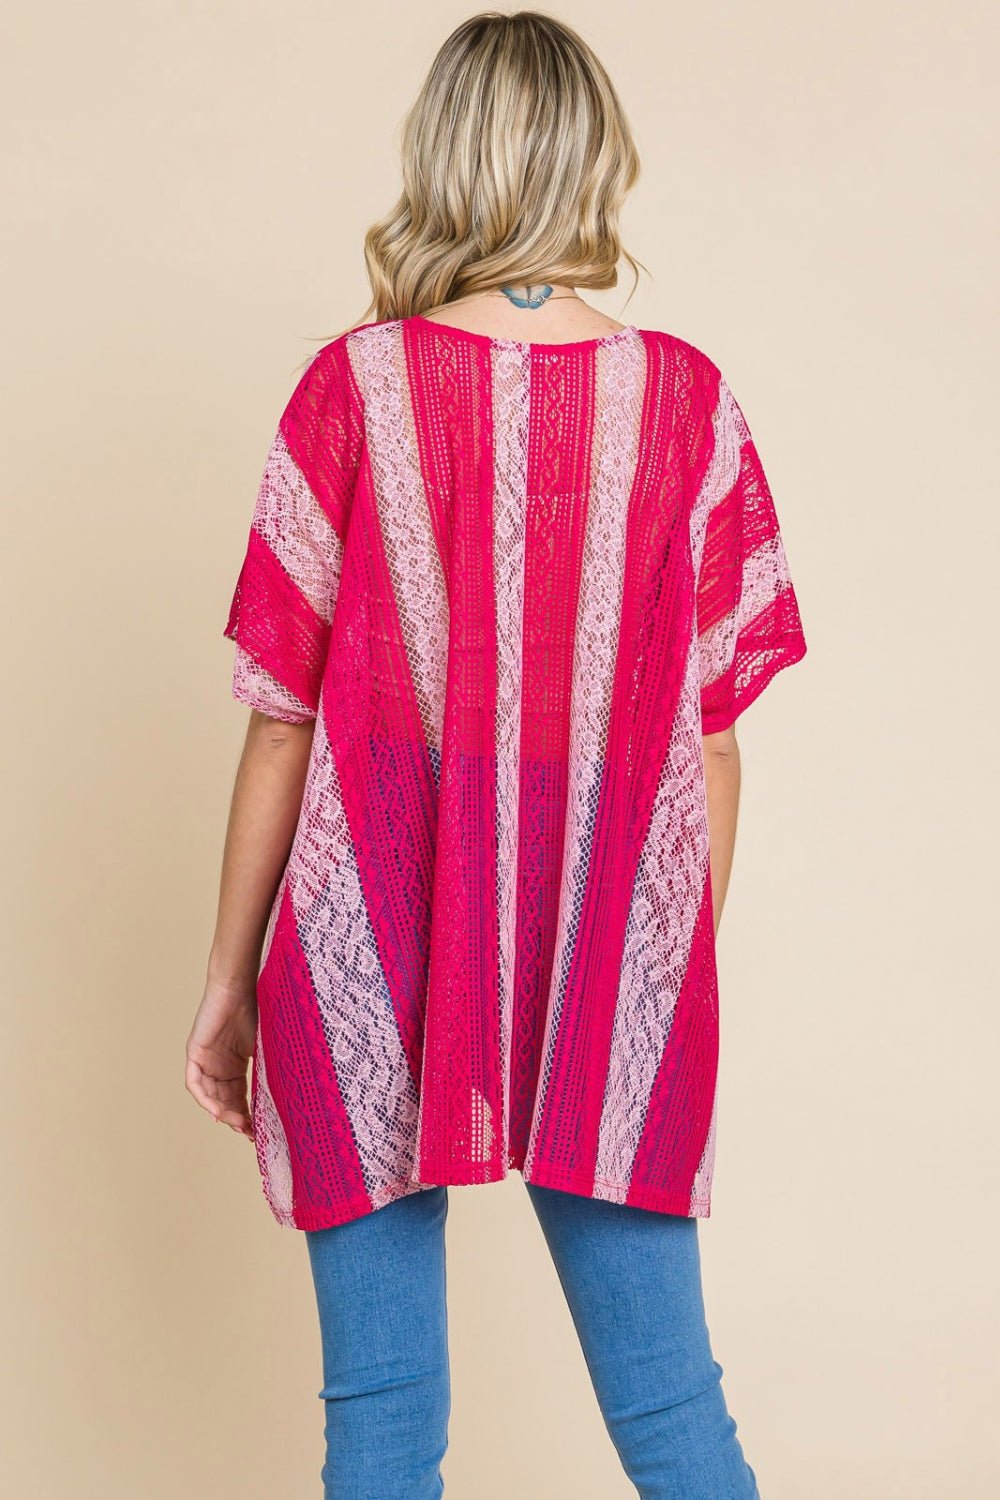 Striped Lace Cover-Up Top in FuchsiaTopCotton Bleu